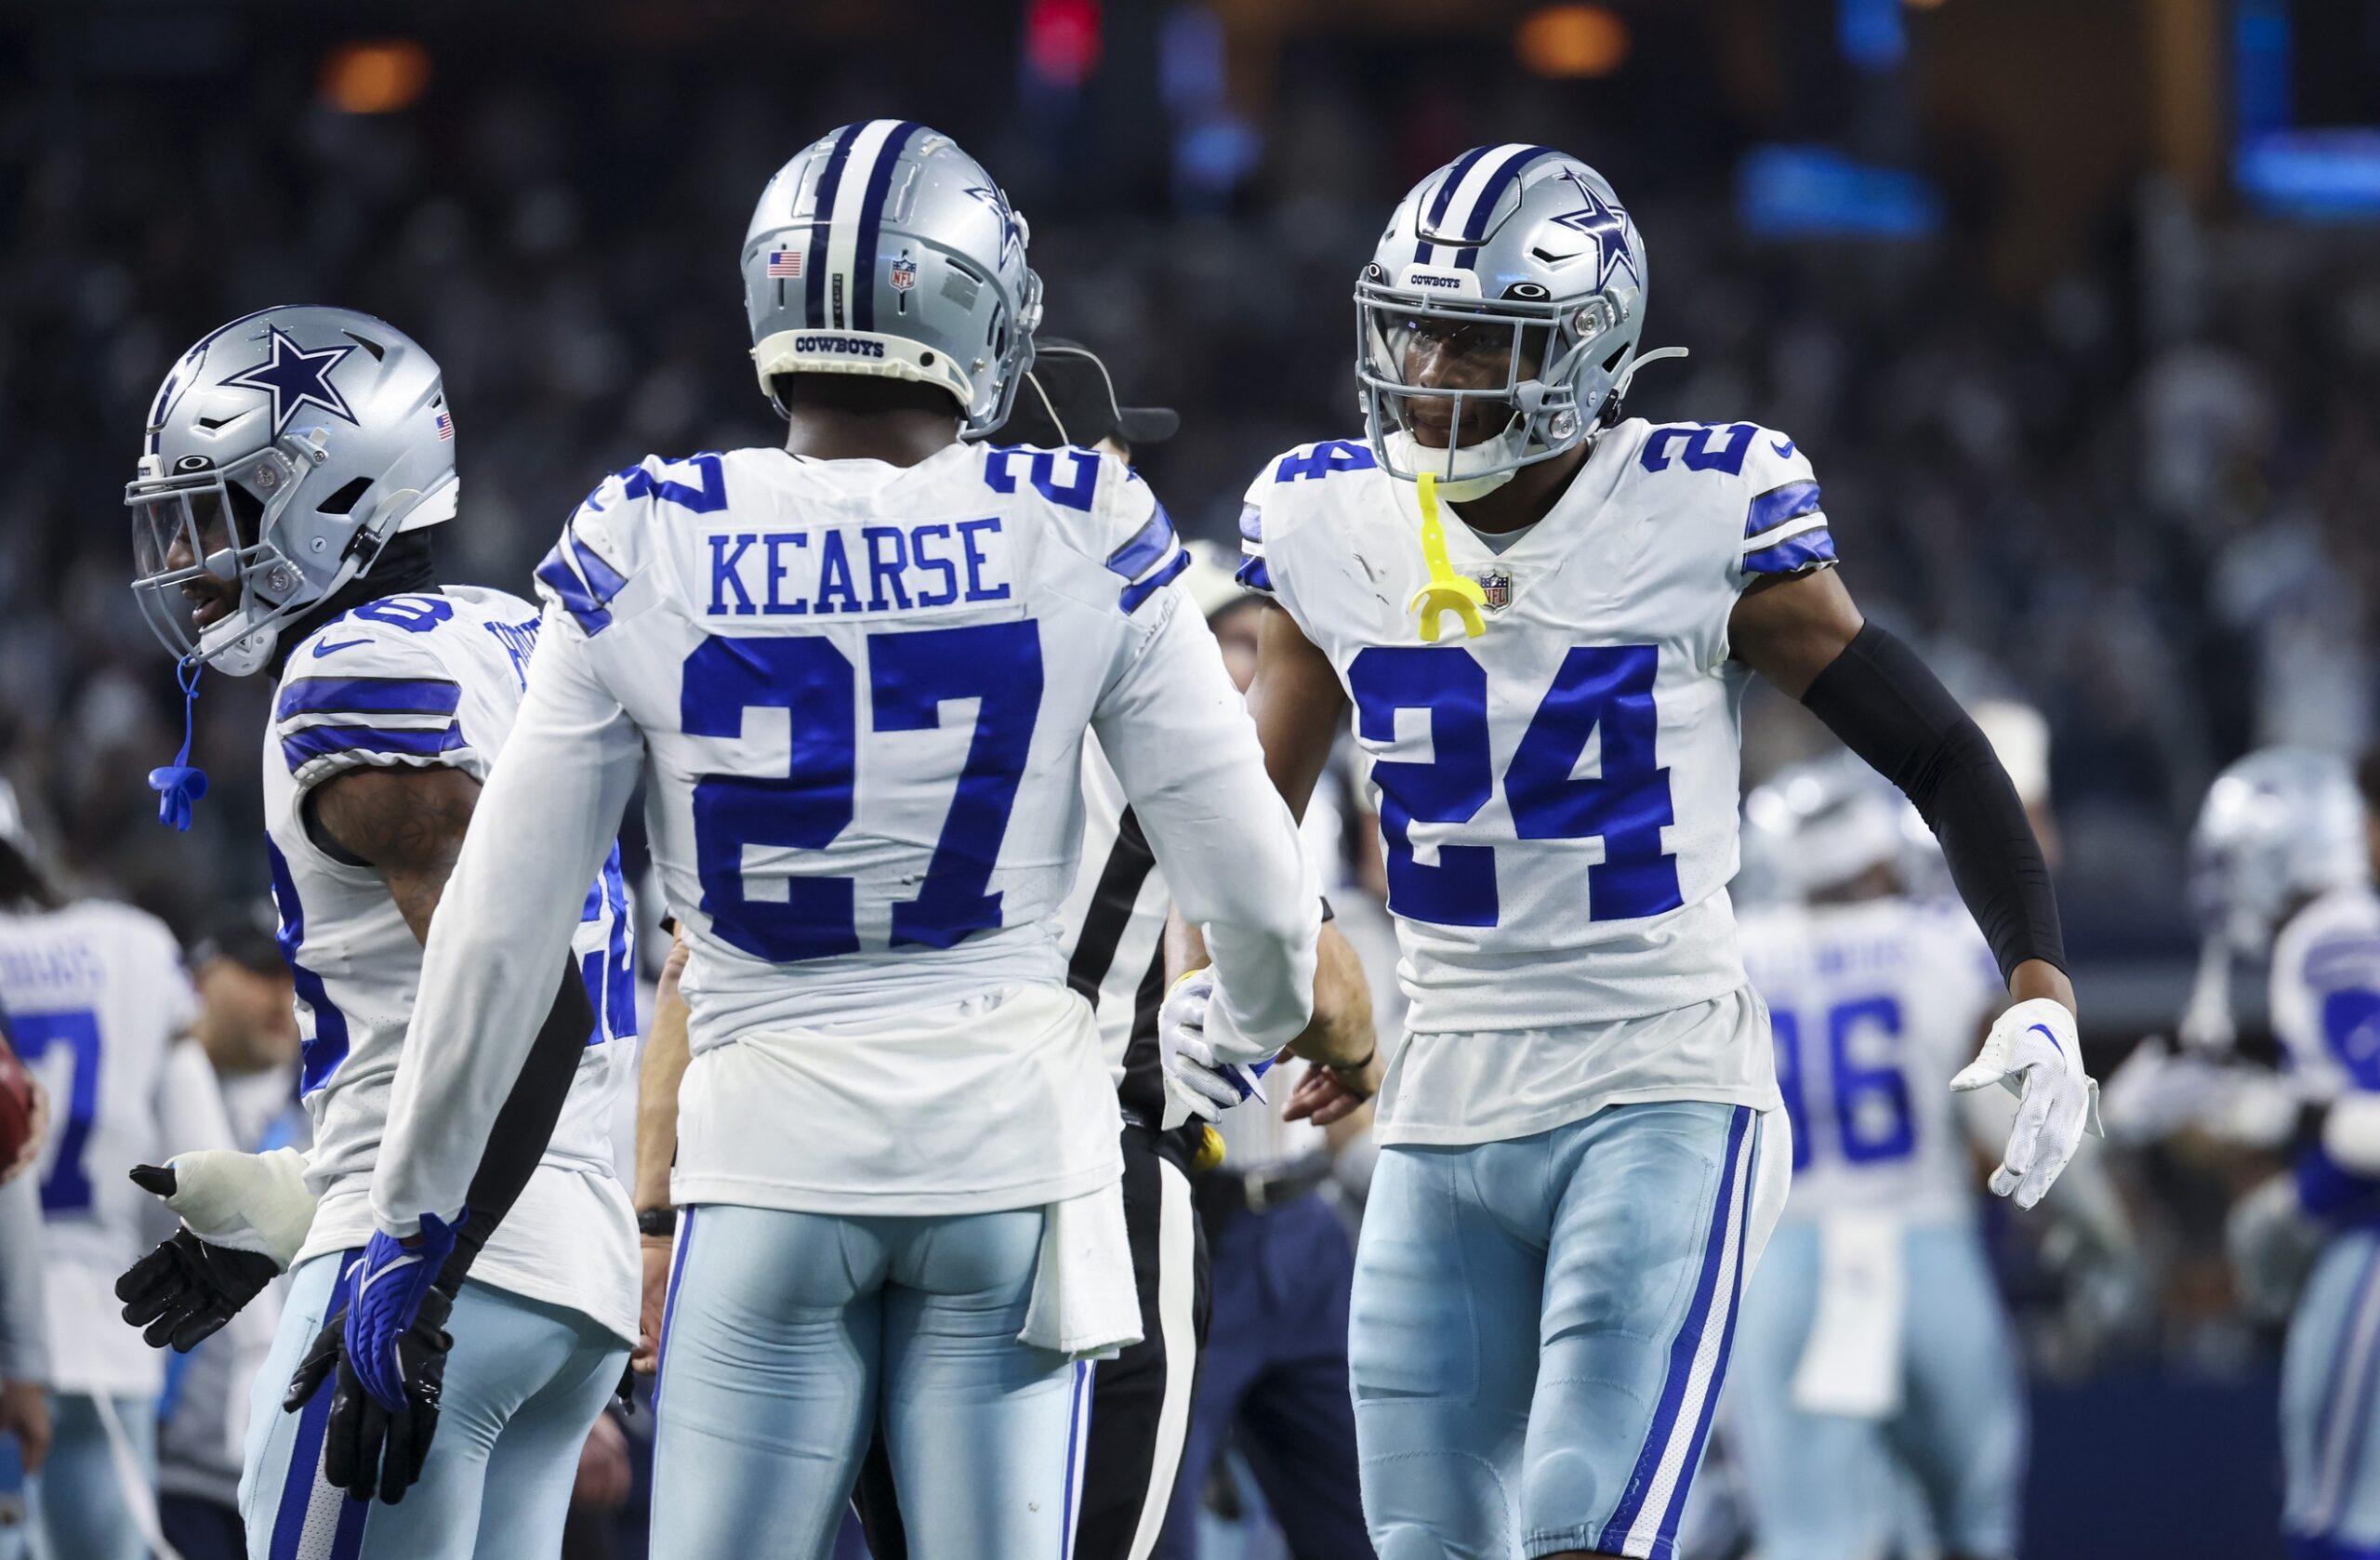 Jayron Kearse (27) celebrates with Dallas Cowboys safety Israel Mukuamu (24) after a fourth down play during the fourth quarter against the Philadelphia Eagles.